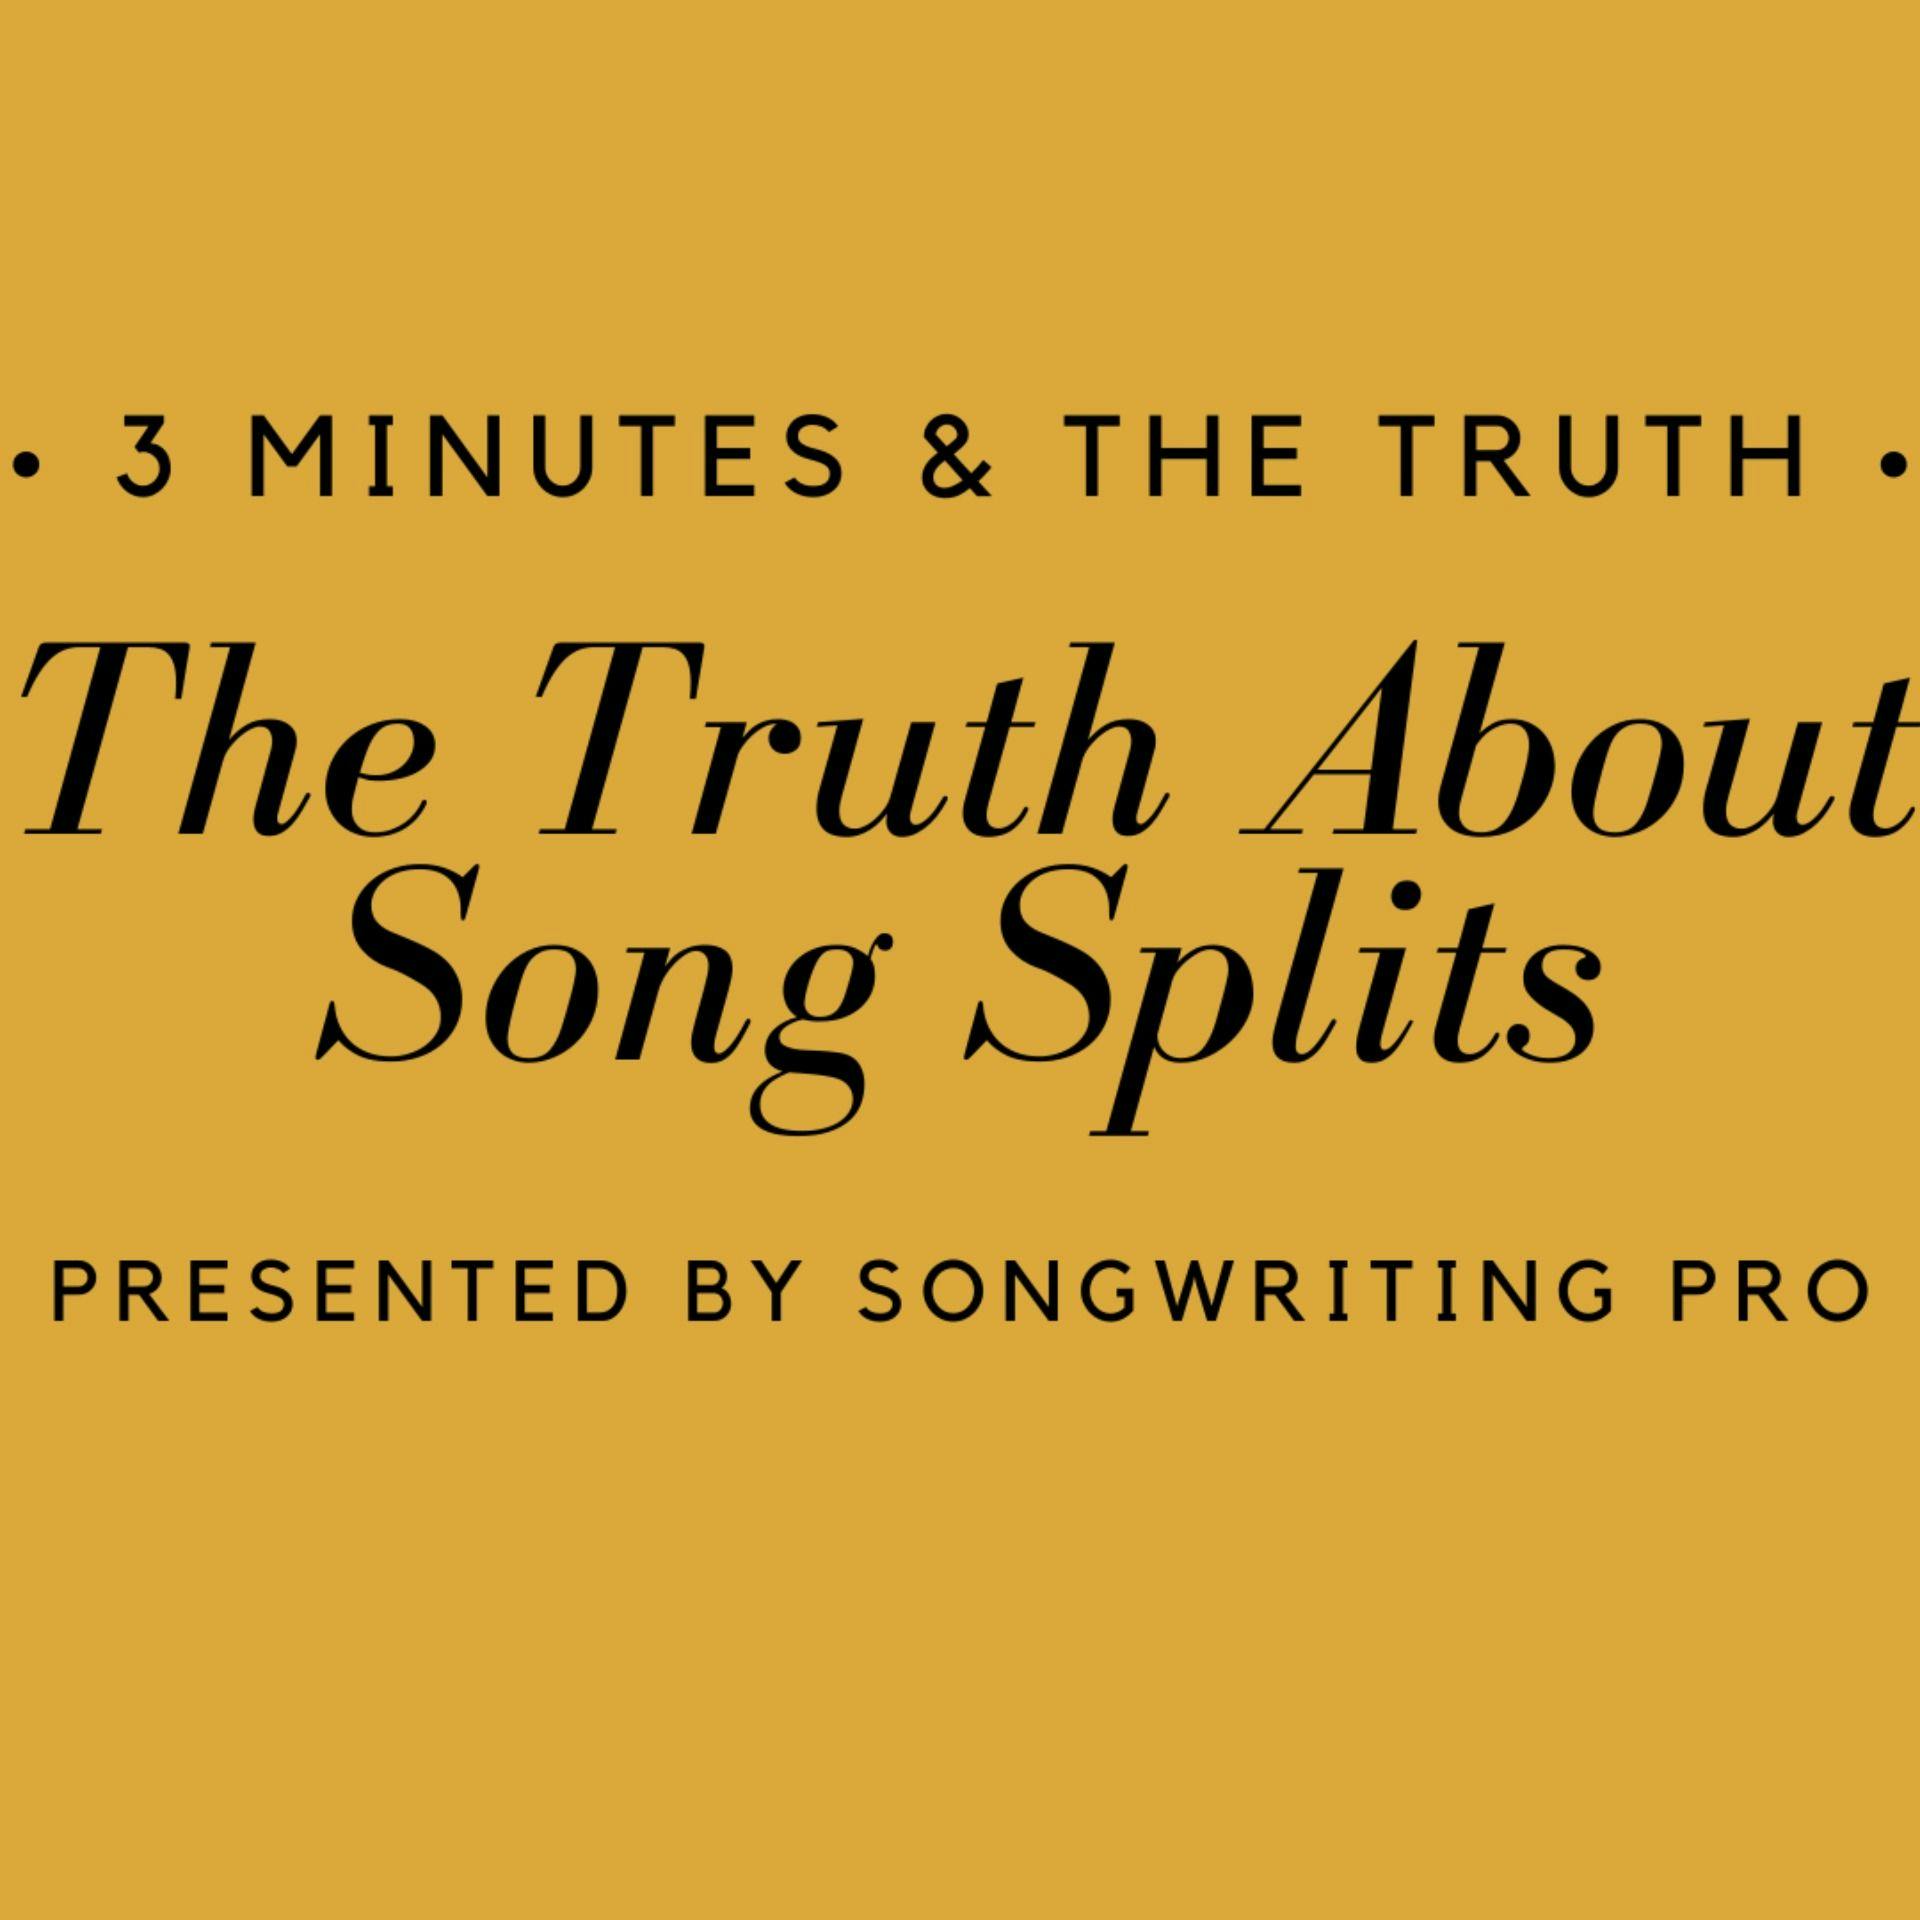 3 Minutes & The Truth: Song Splits